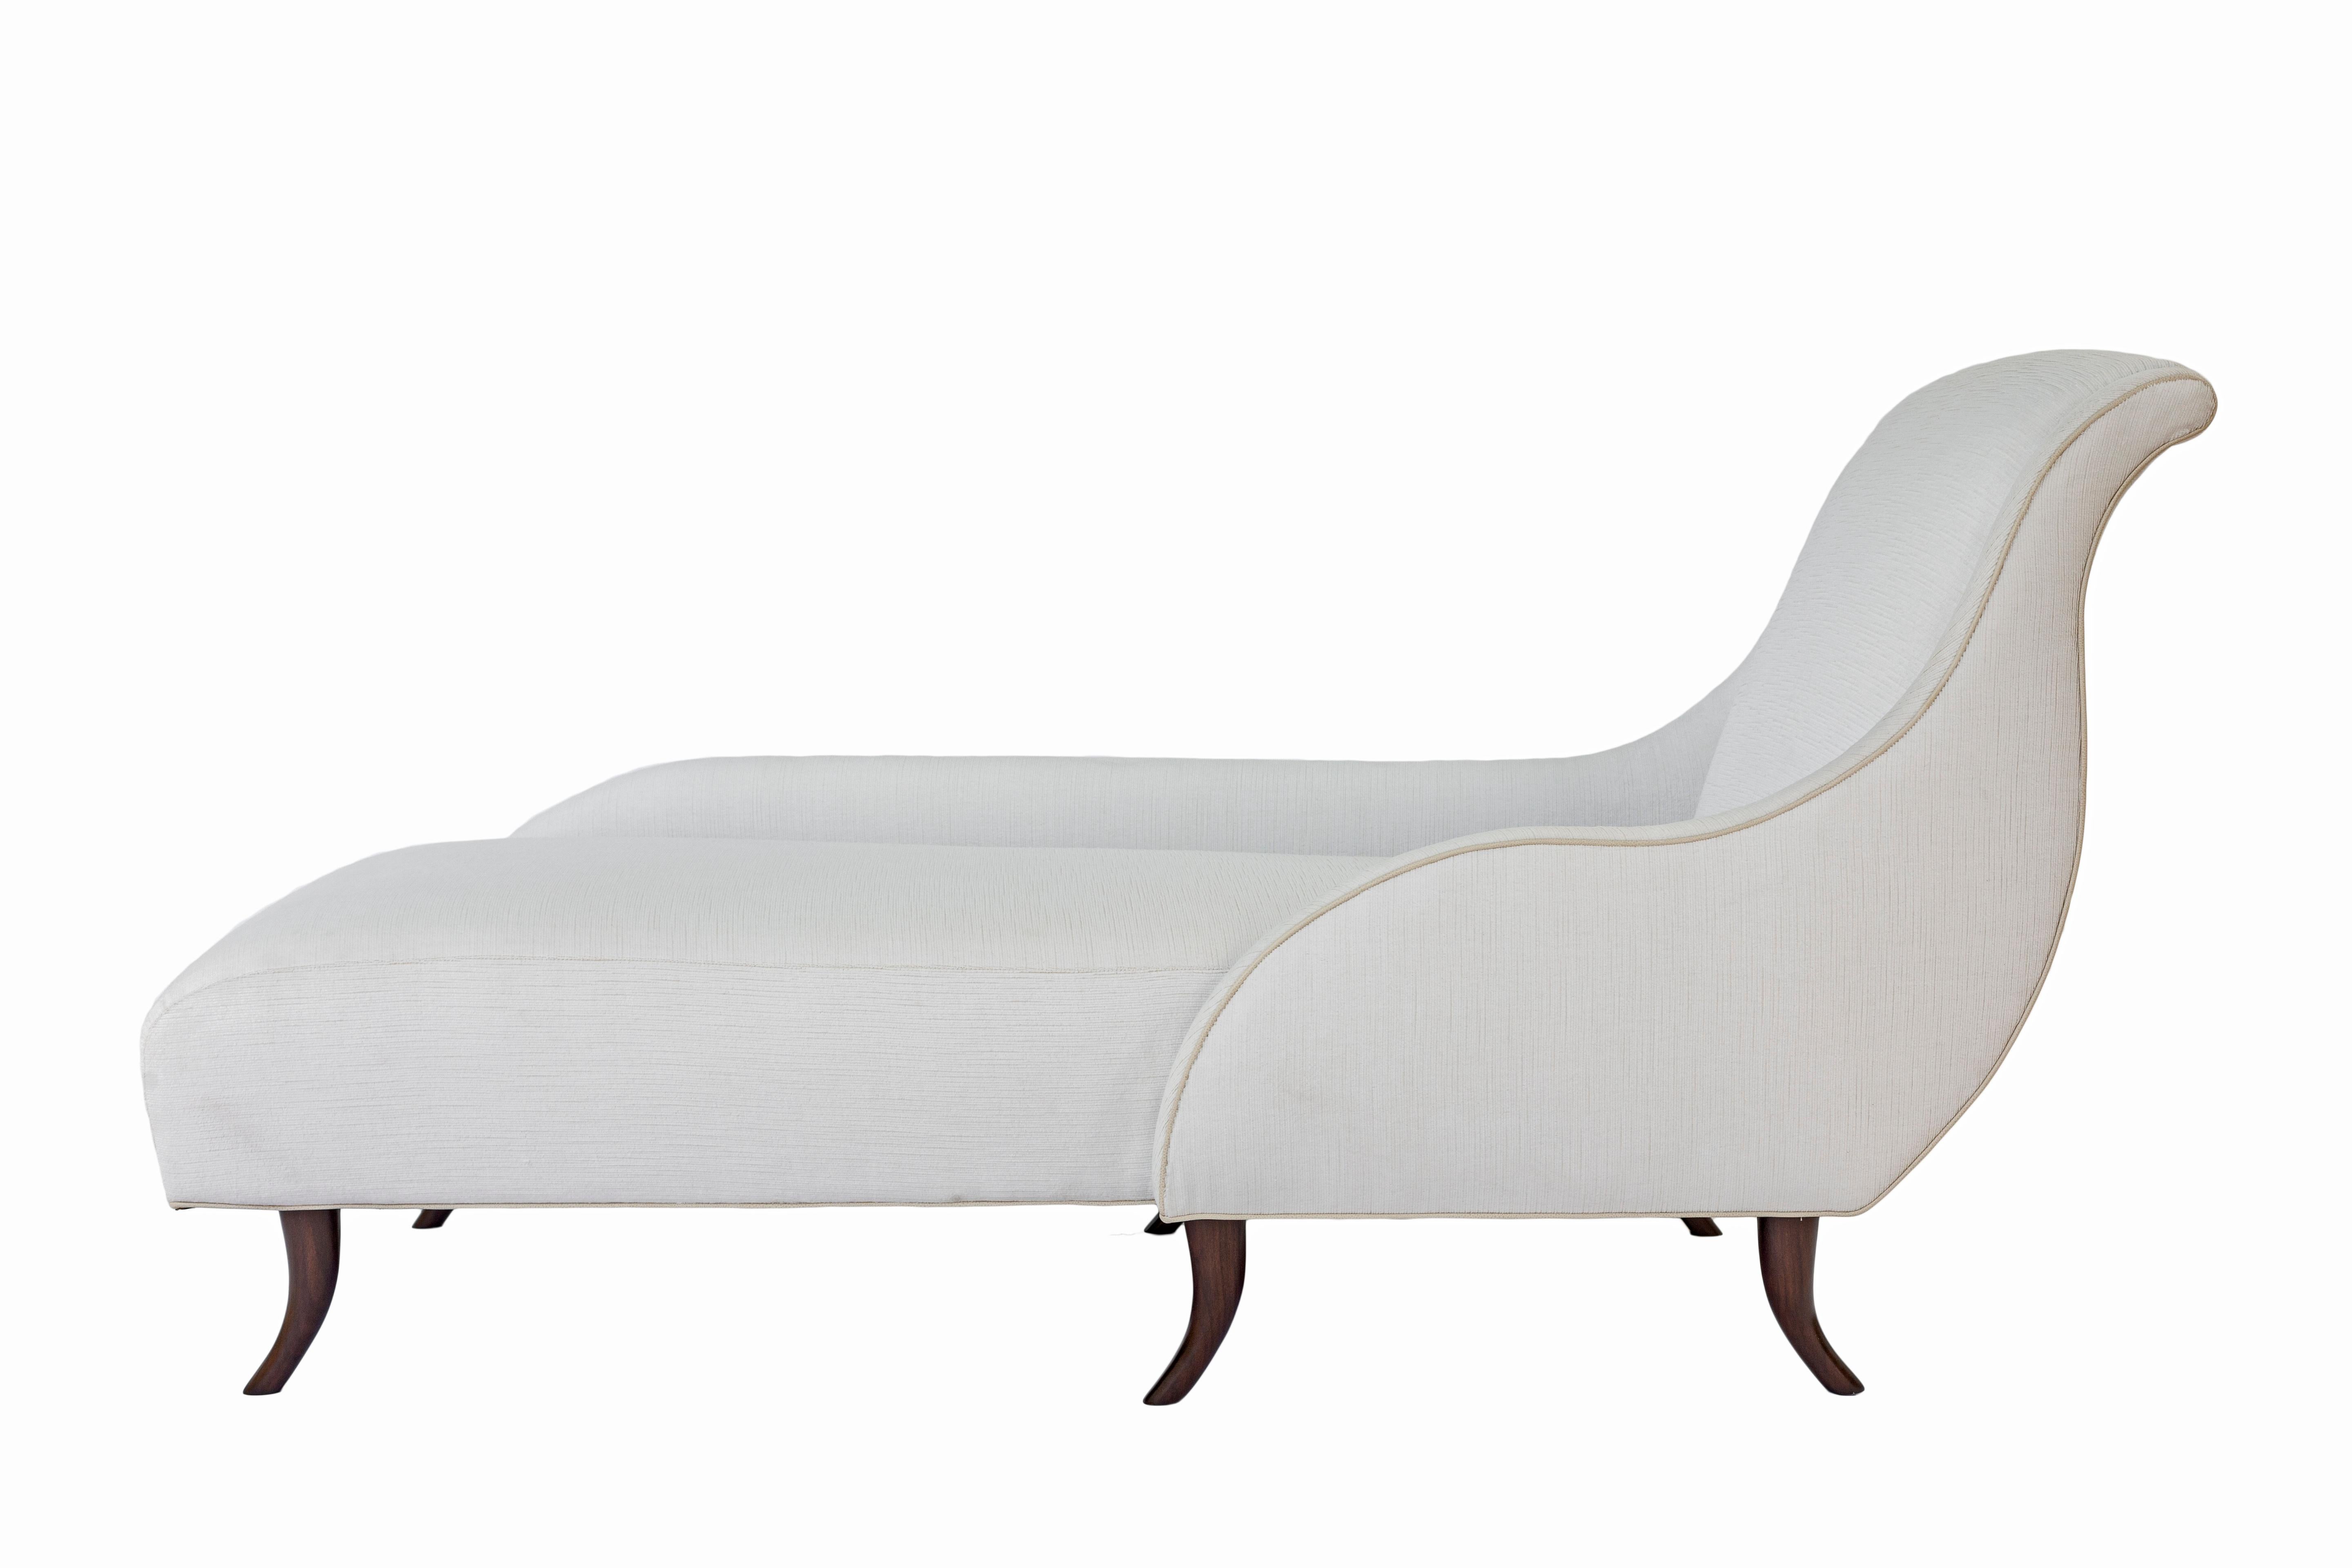 American Oak and Walnut Crafted Chaise with Luscious Curves For Sale